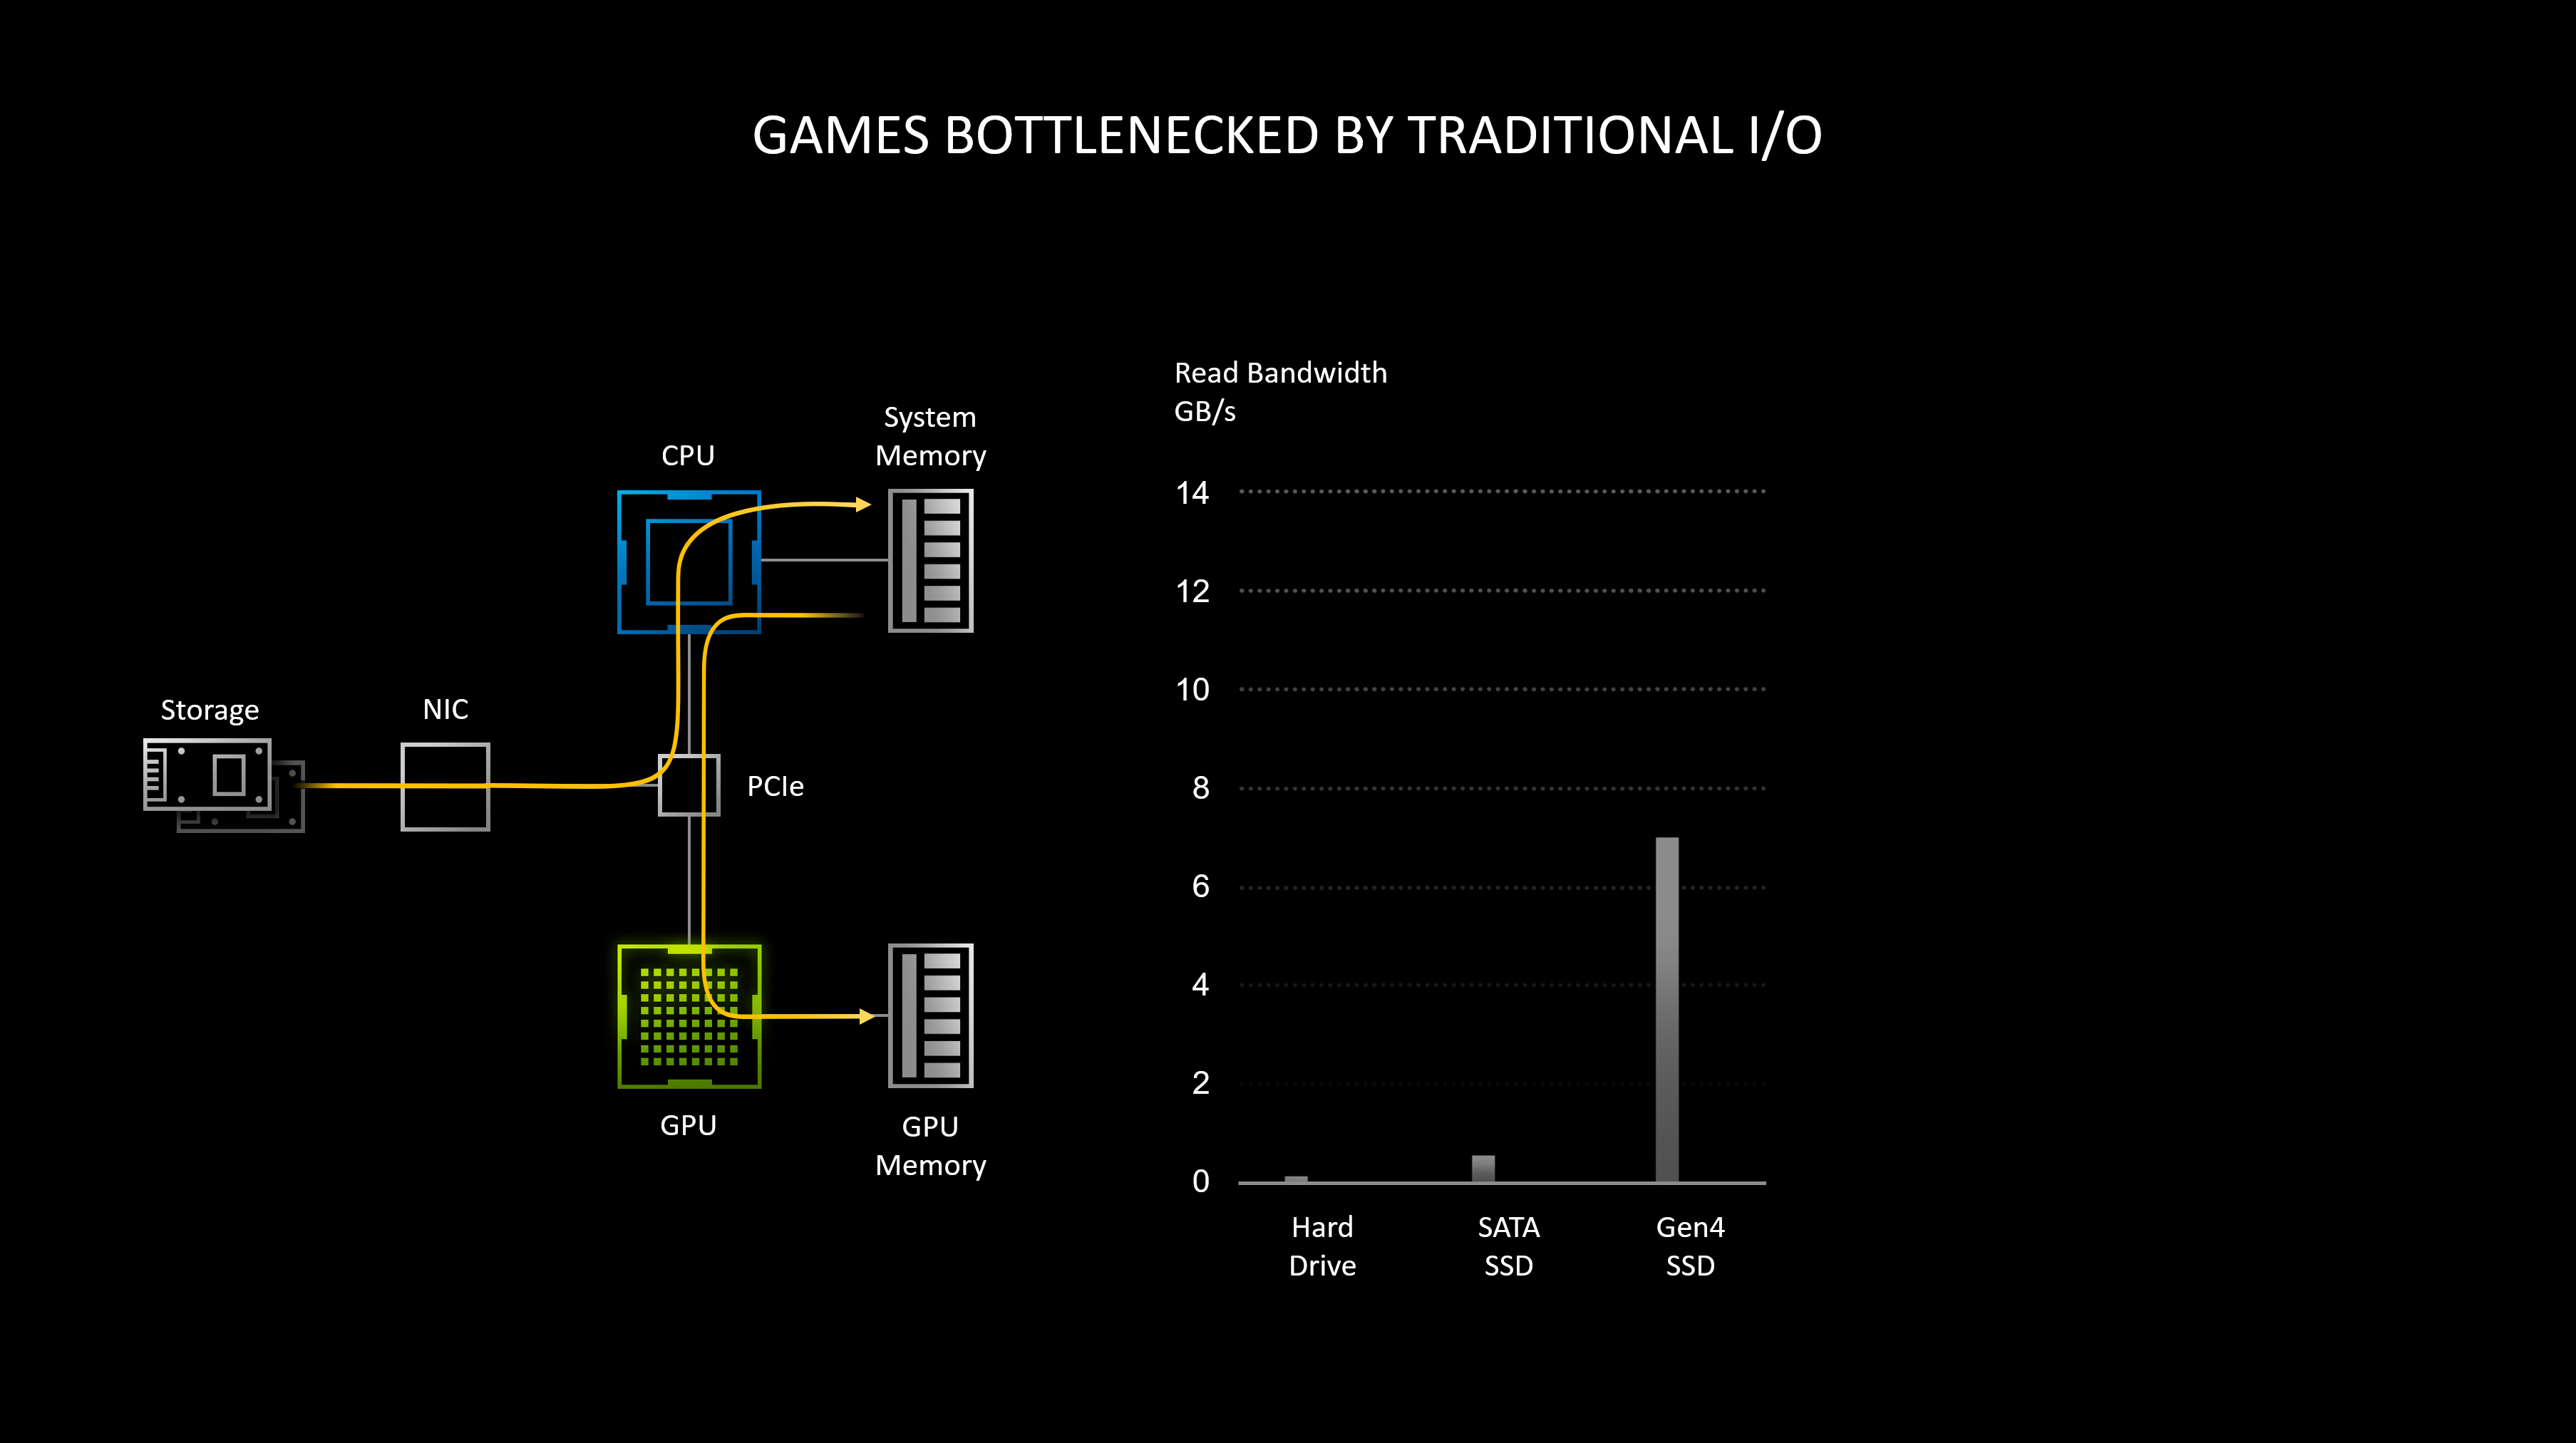 games bottlenecked by traditional IO